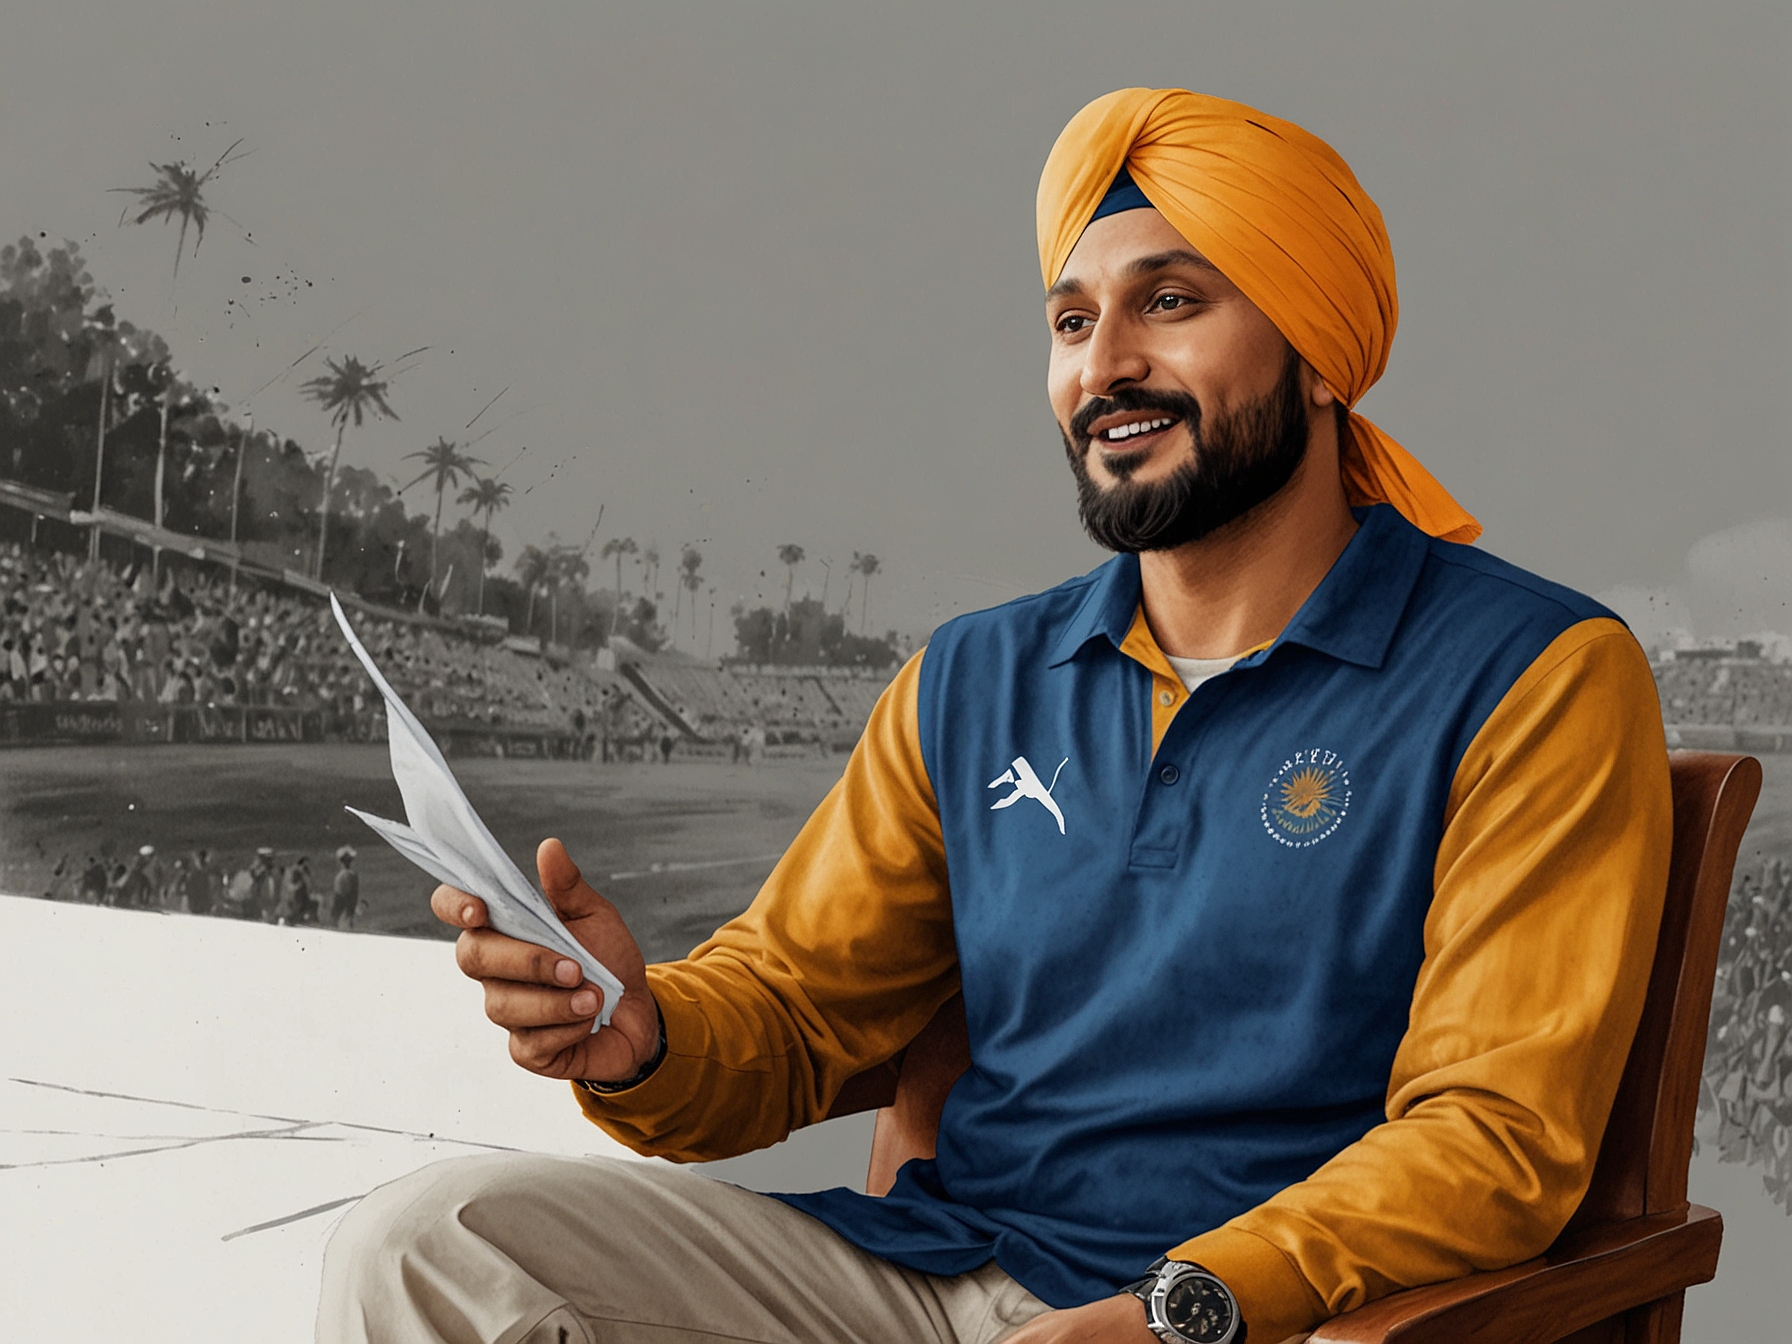 Harbhajan Singh shares insights during an interview, confidently discussing India's prospects and strengths for the upcoming ICC events in the West Indies.